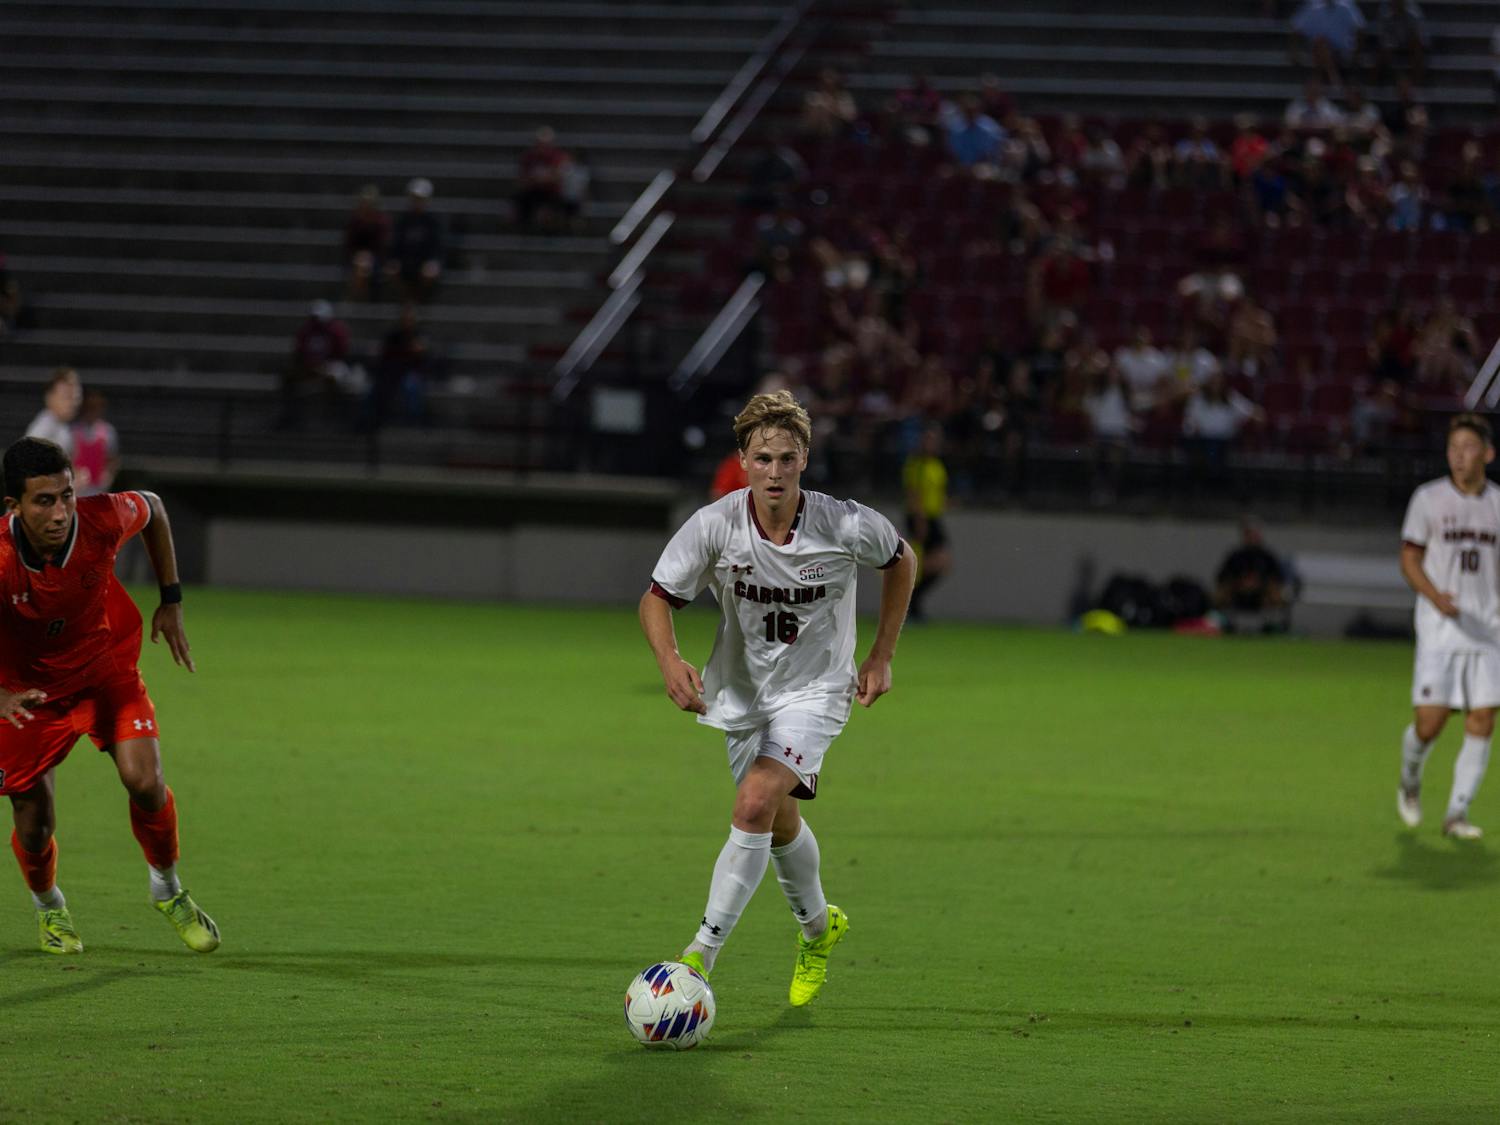 The South Carolina men's soccer team used a strong first half and defensive effort to shutout Campbell 1-0 on Saturday, Sept. 17.&nbsp;